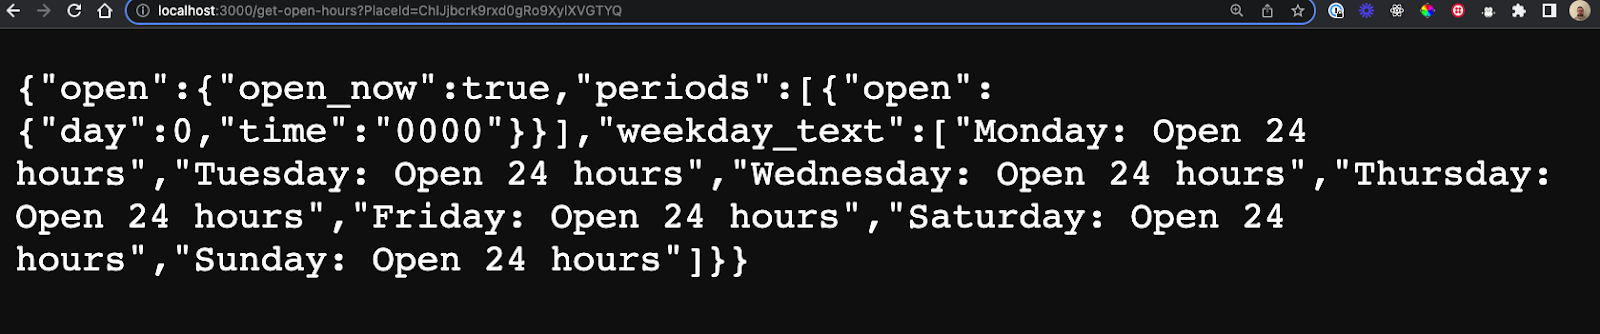 Output from the function showing opening times in JSON format.